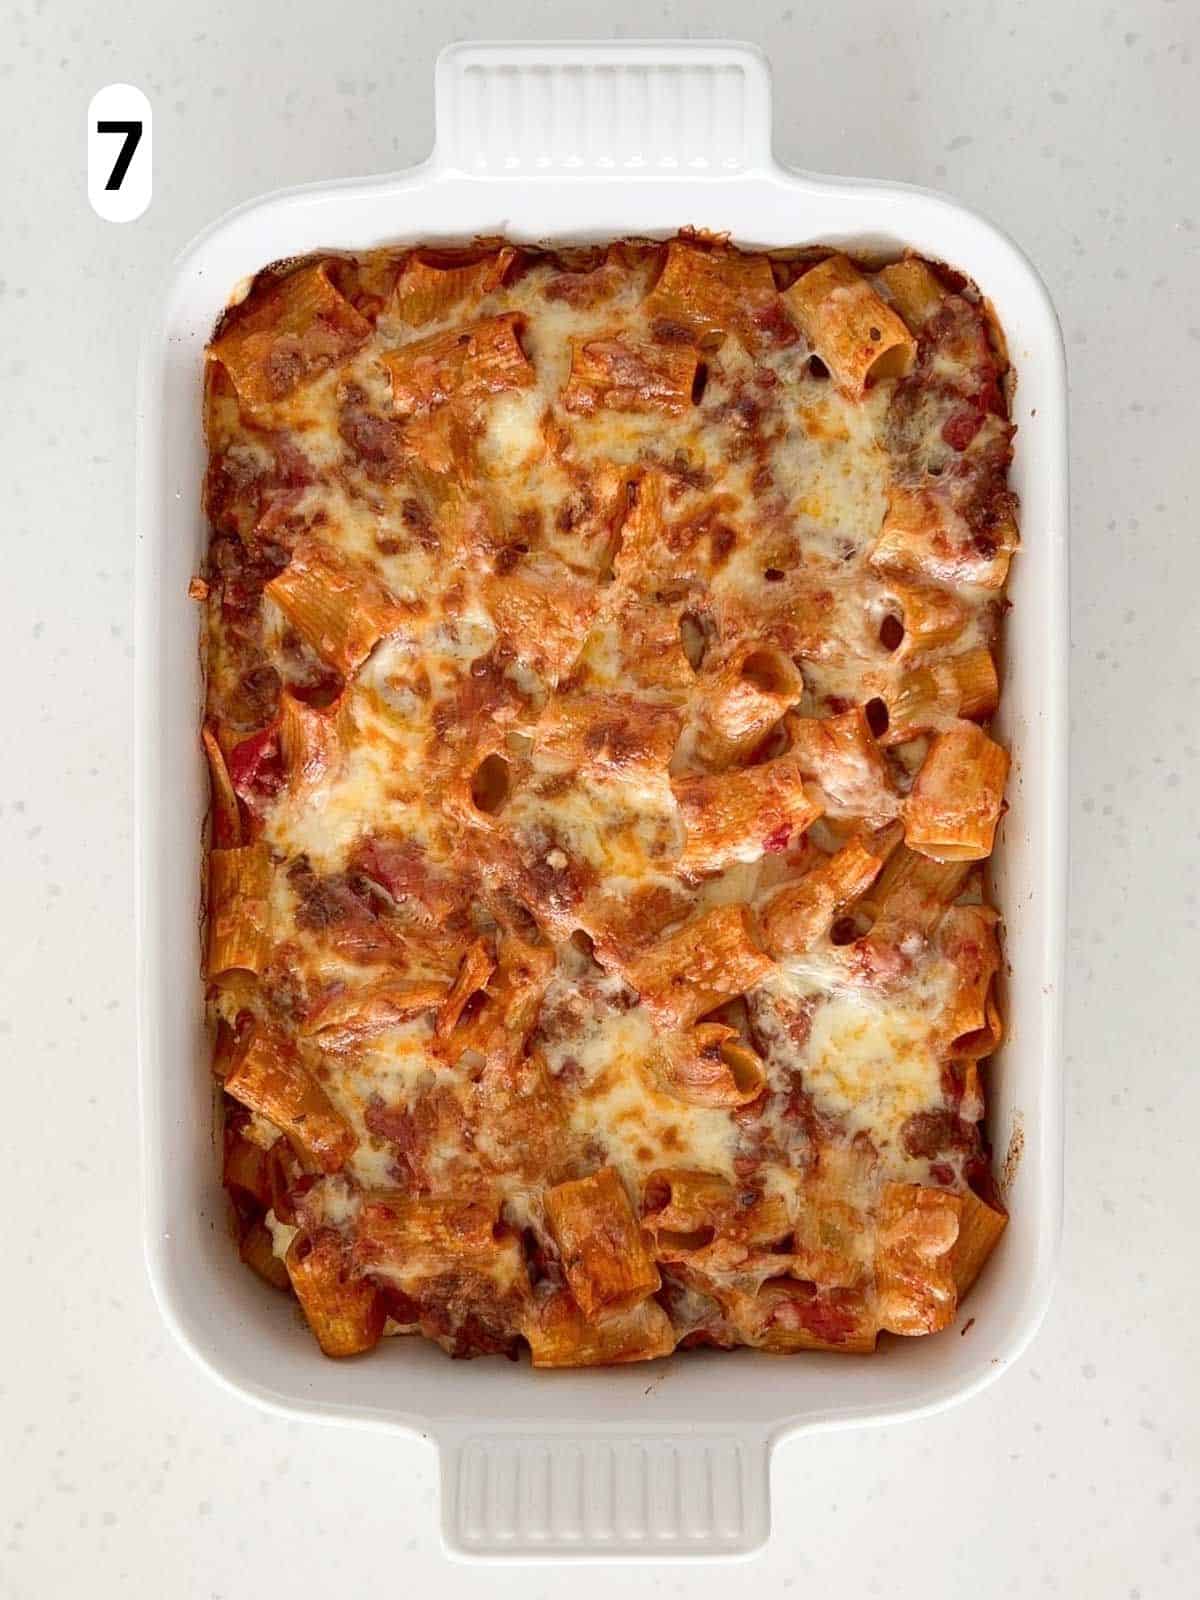 The rigatoni is baked until the cheese is melted and golden.